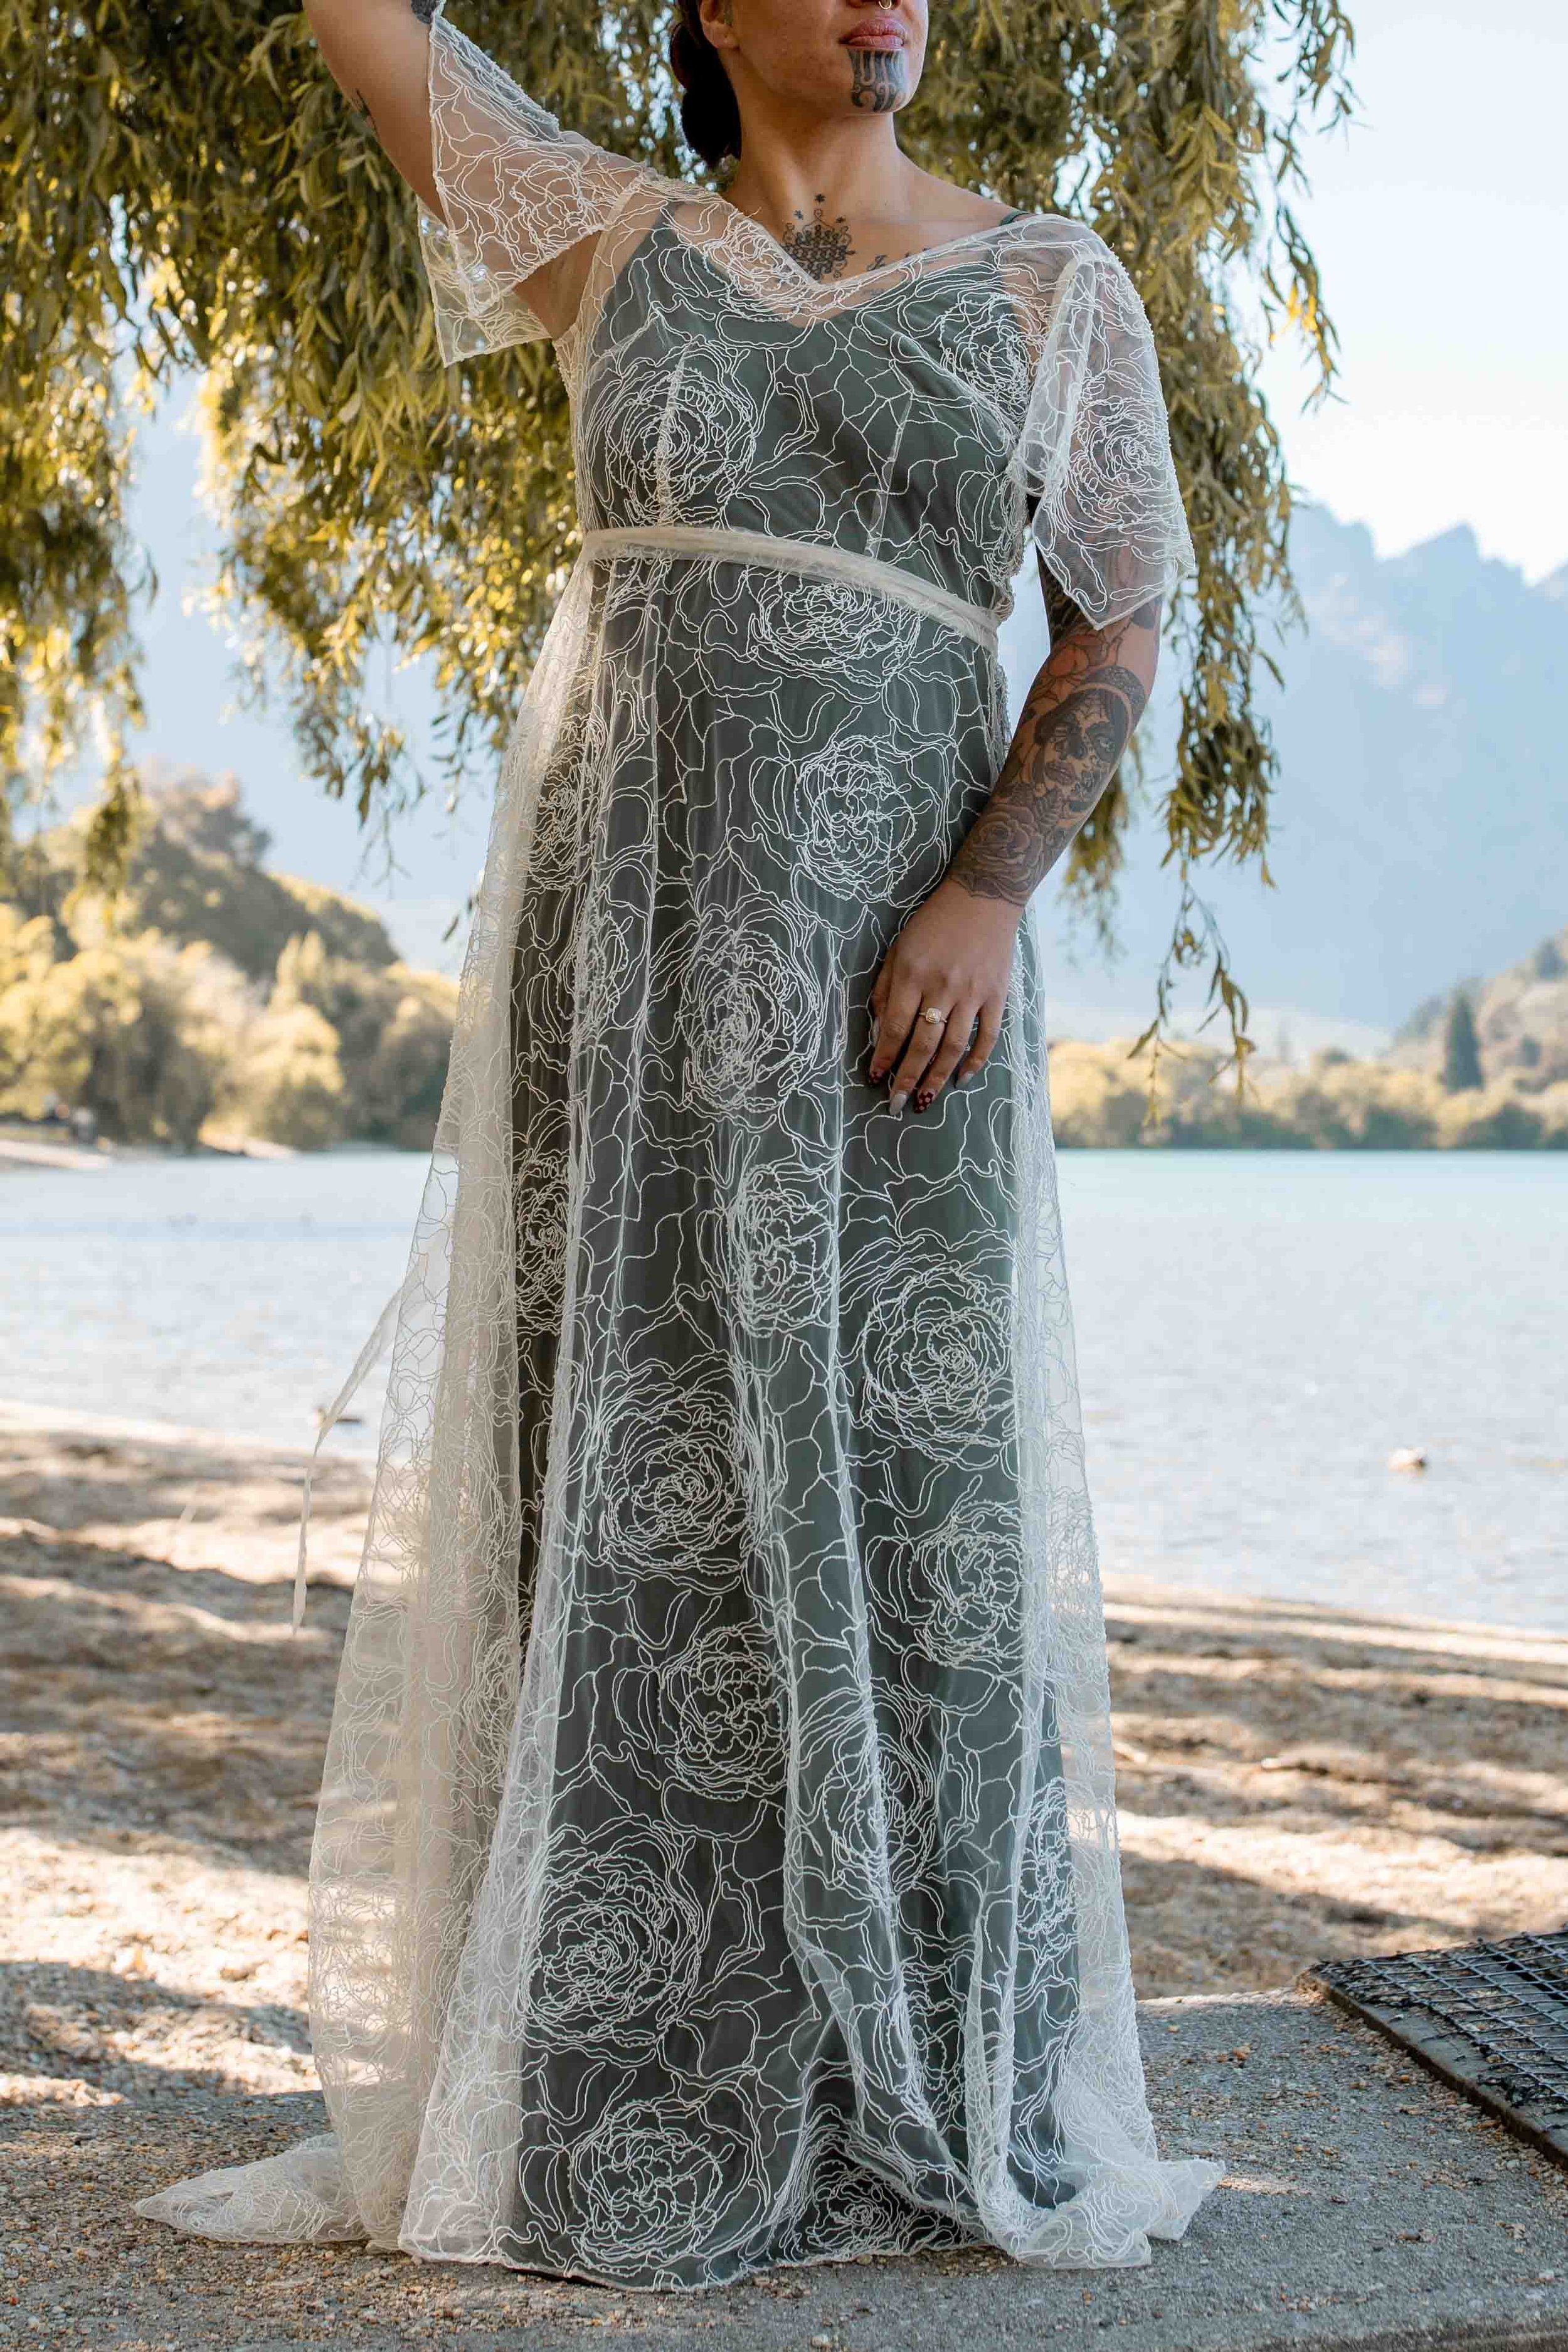 Sofia Wrap in Peony Lace +Harper Slip Dress in Olive - Nemo Bridal Couture Queenstown New Zealand 0V9A2387.jpg